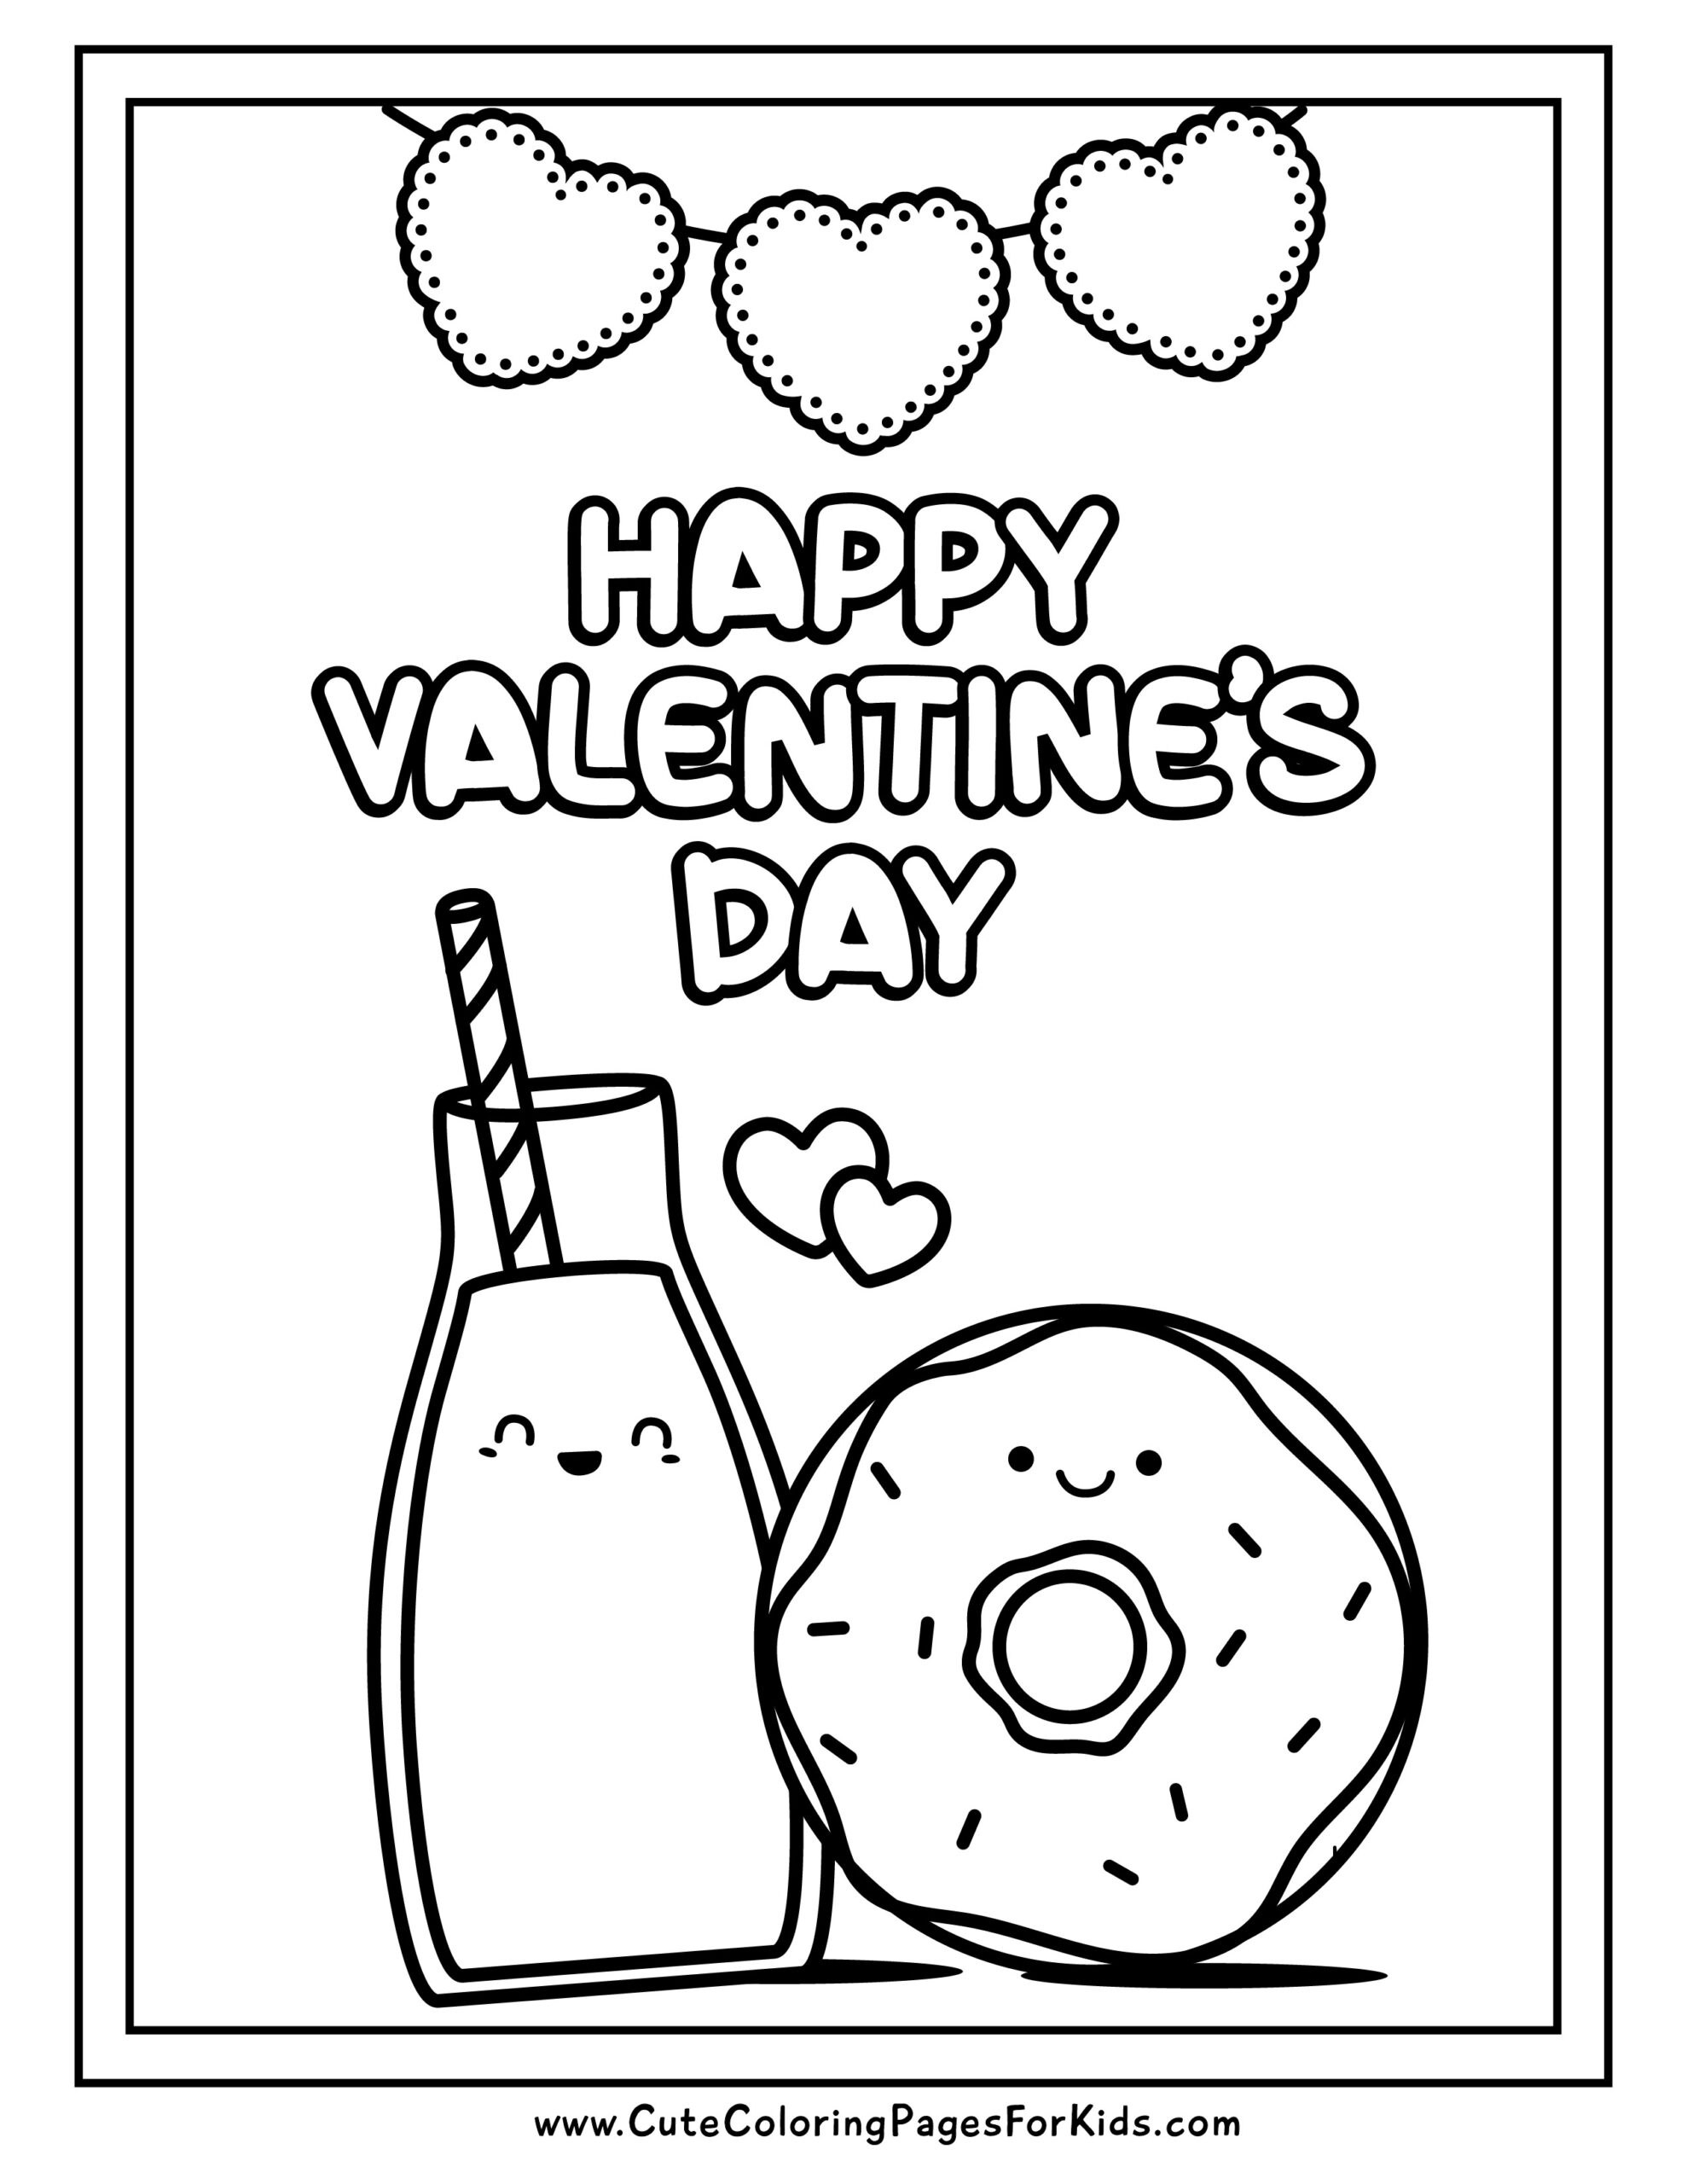 Valentine s Day Coloring Pages: 5 Free Printable PDFs Cute Coloring